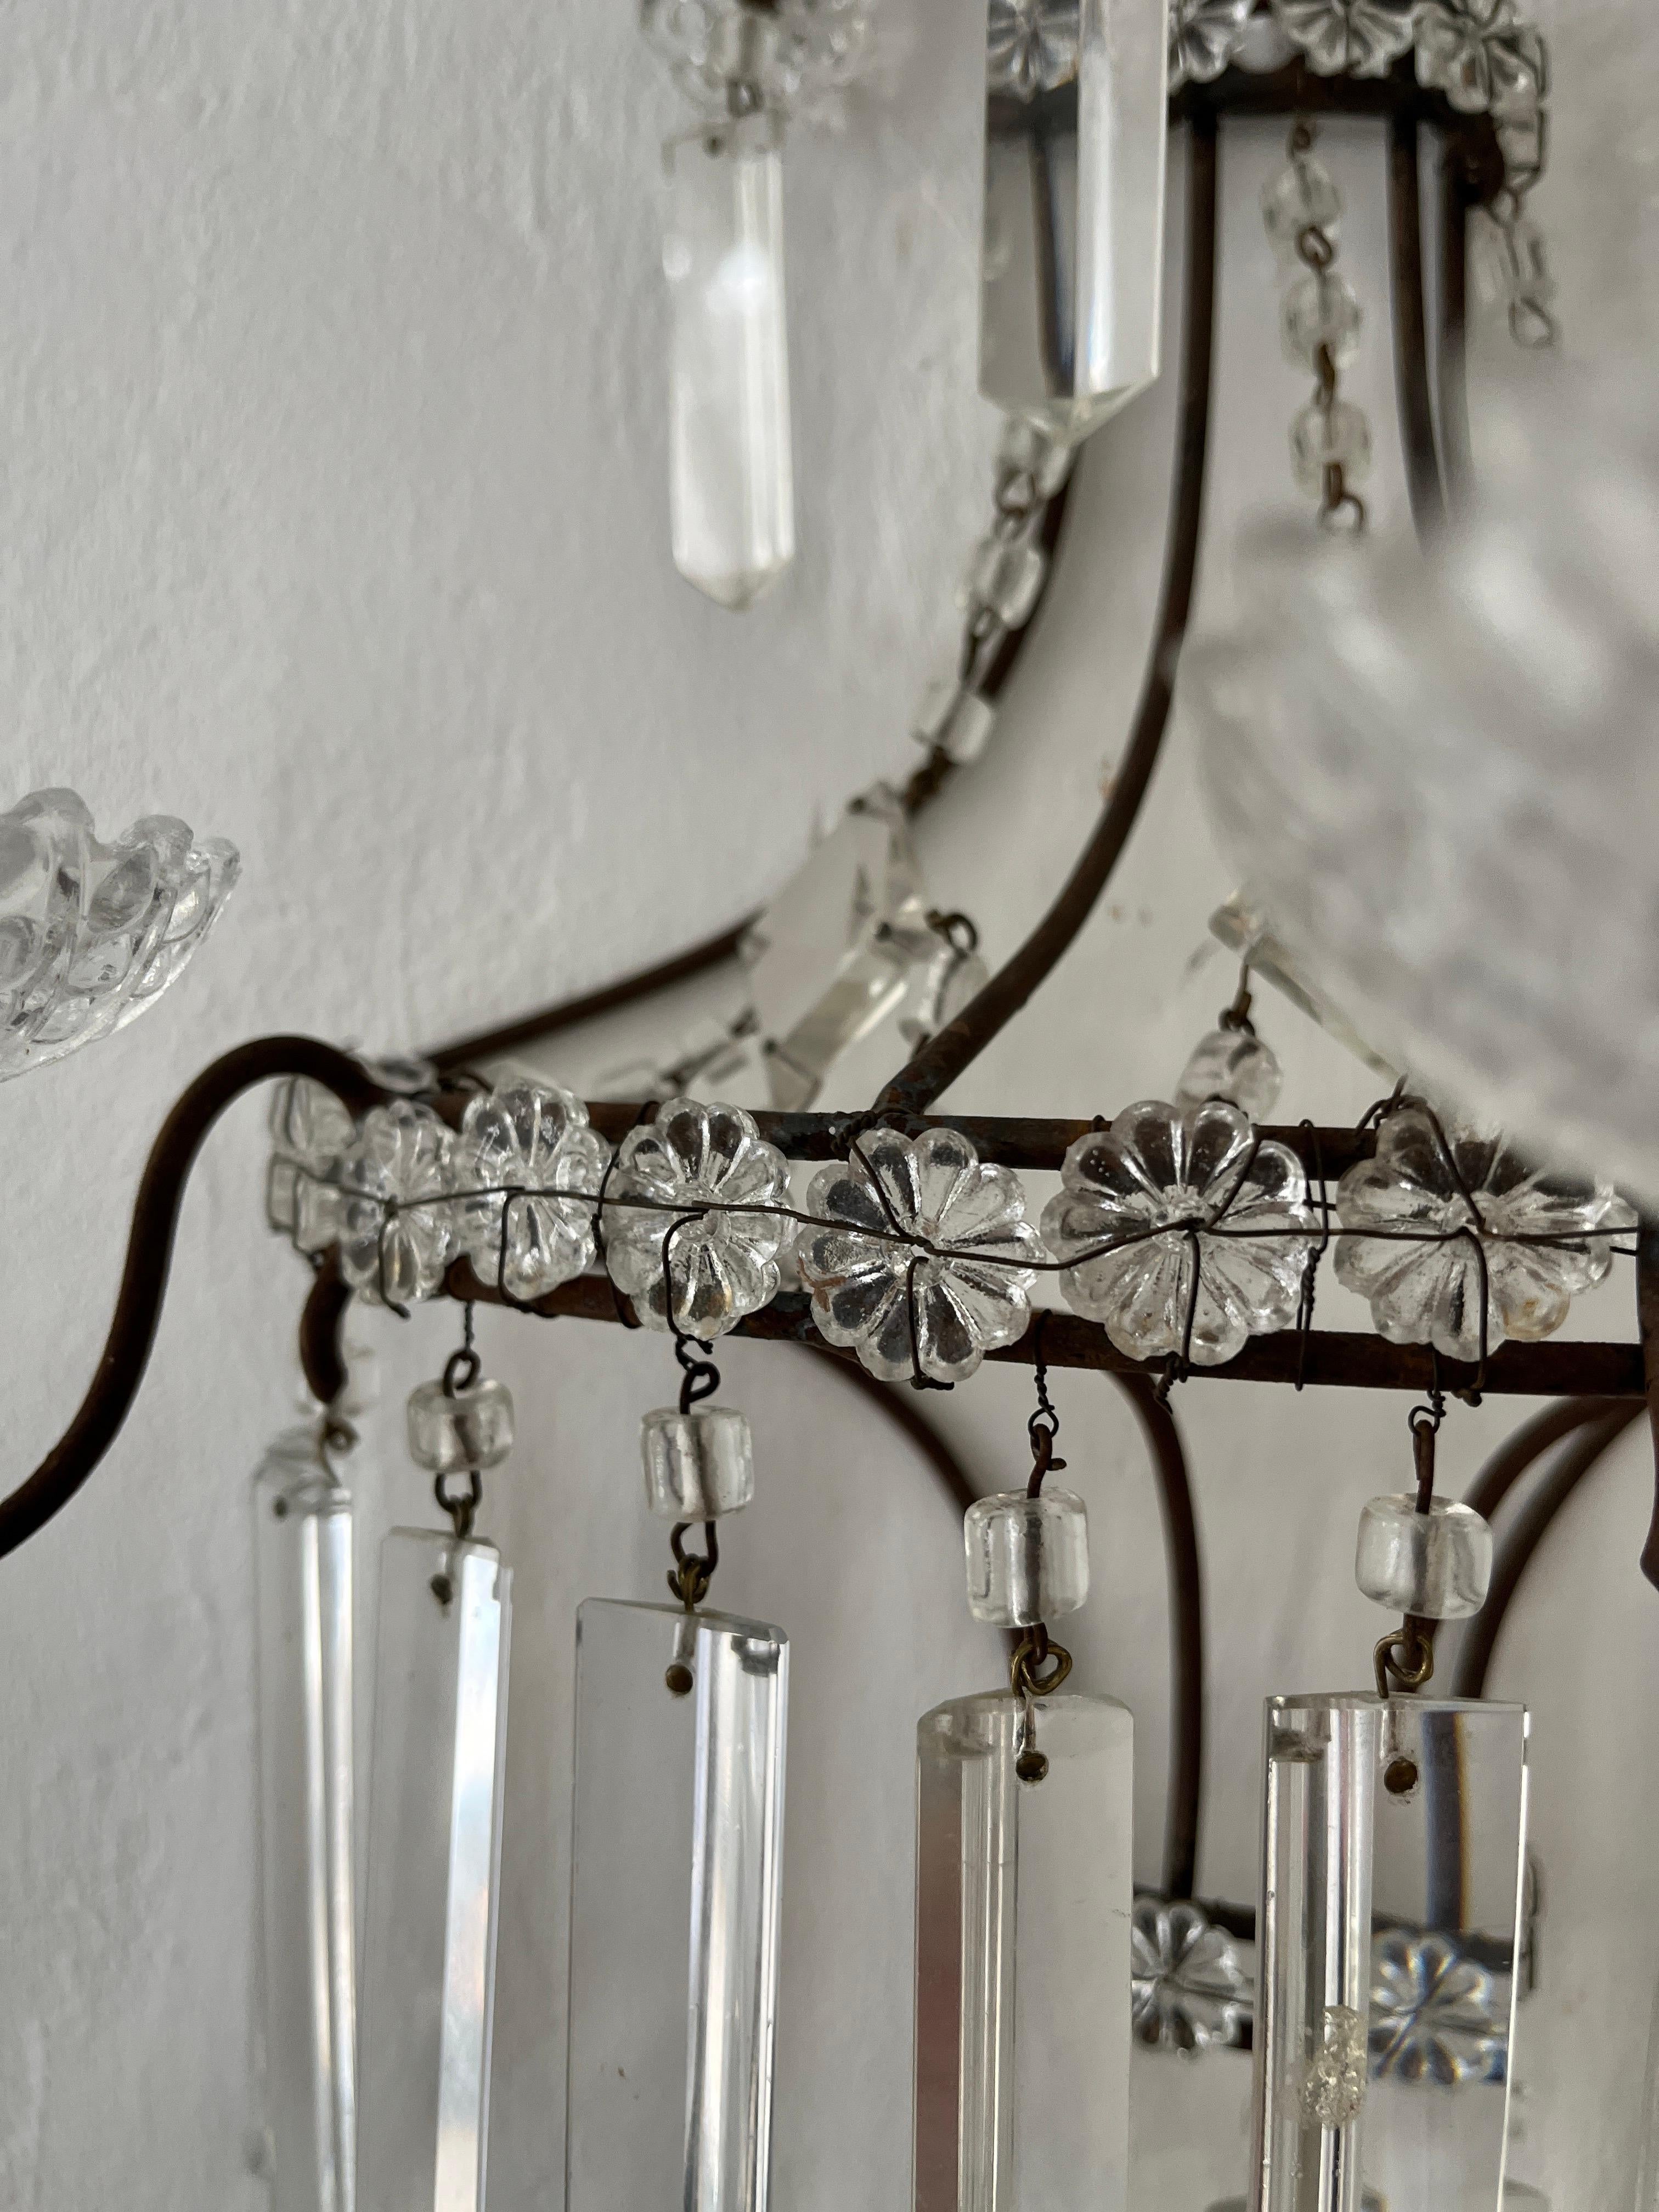 French Crystal Prisms 3 Light Extremely Old and Stunning Sconces c 1900 For Sale 3